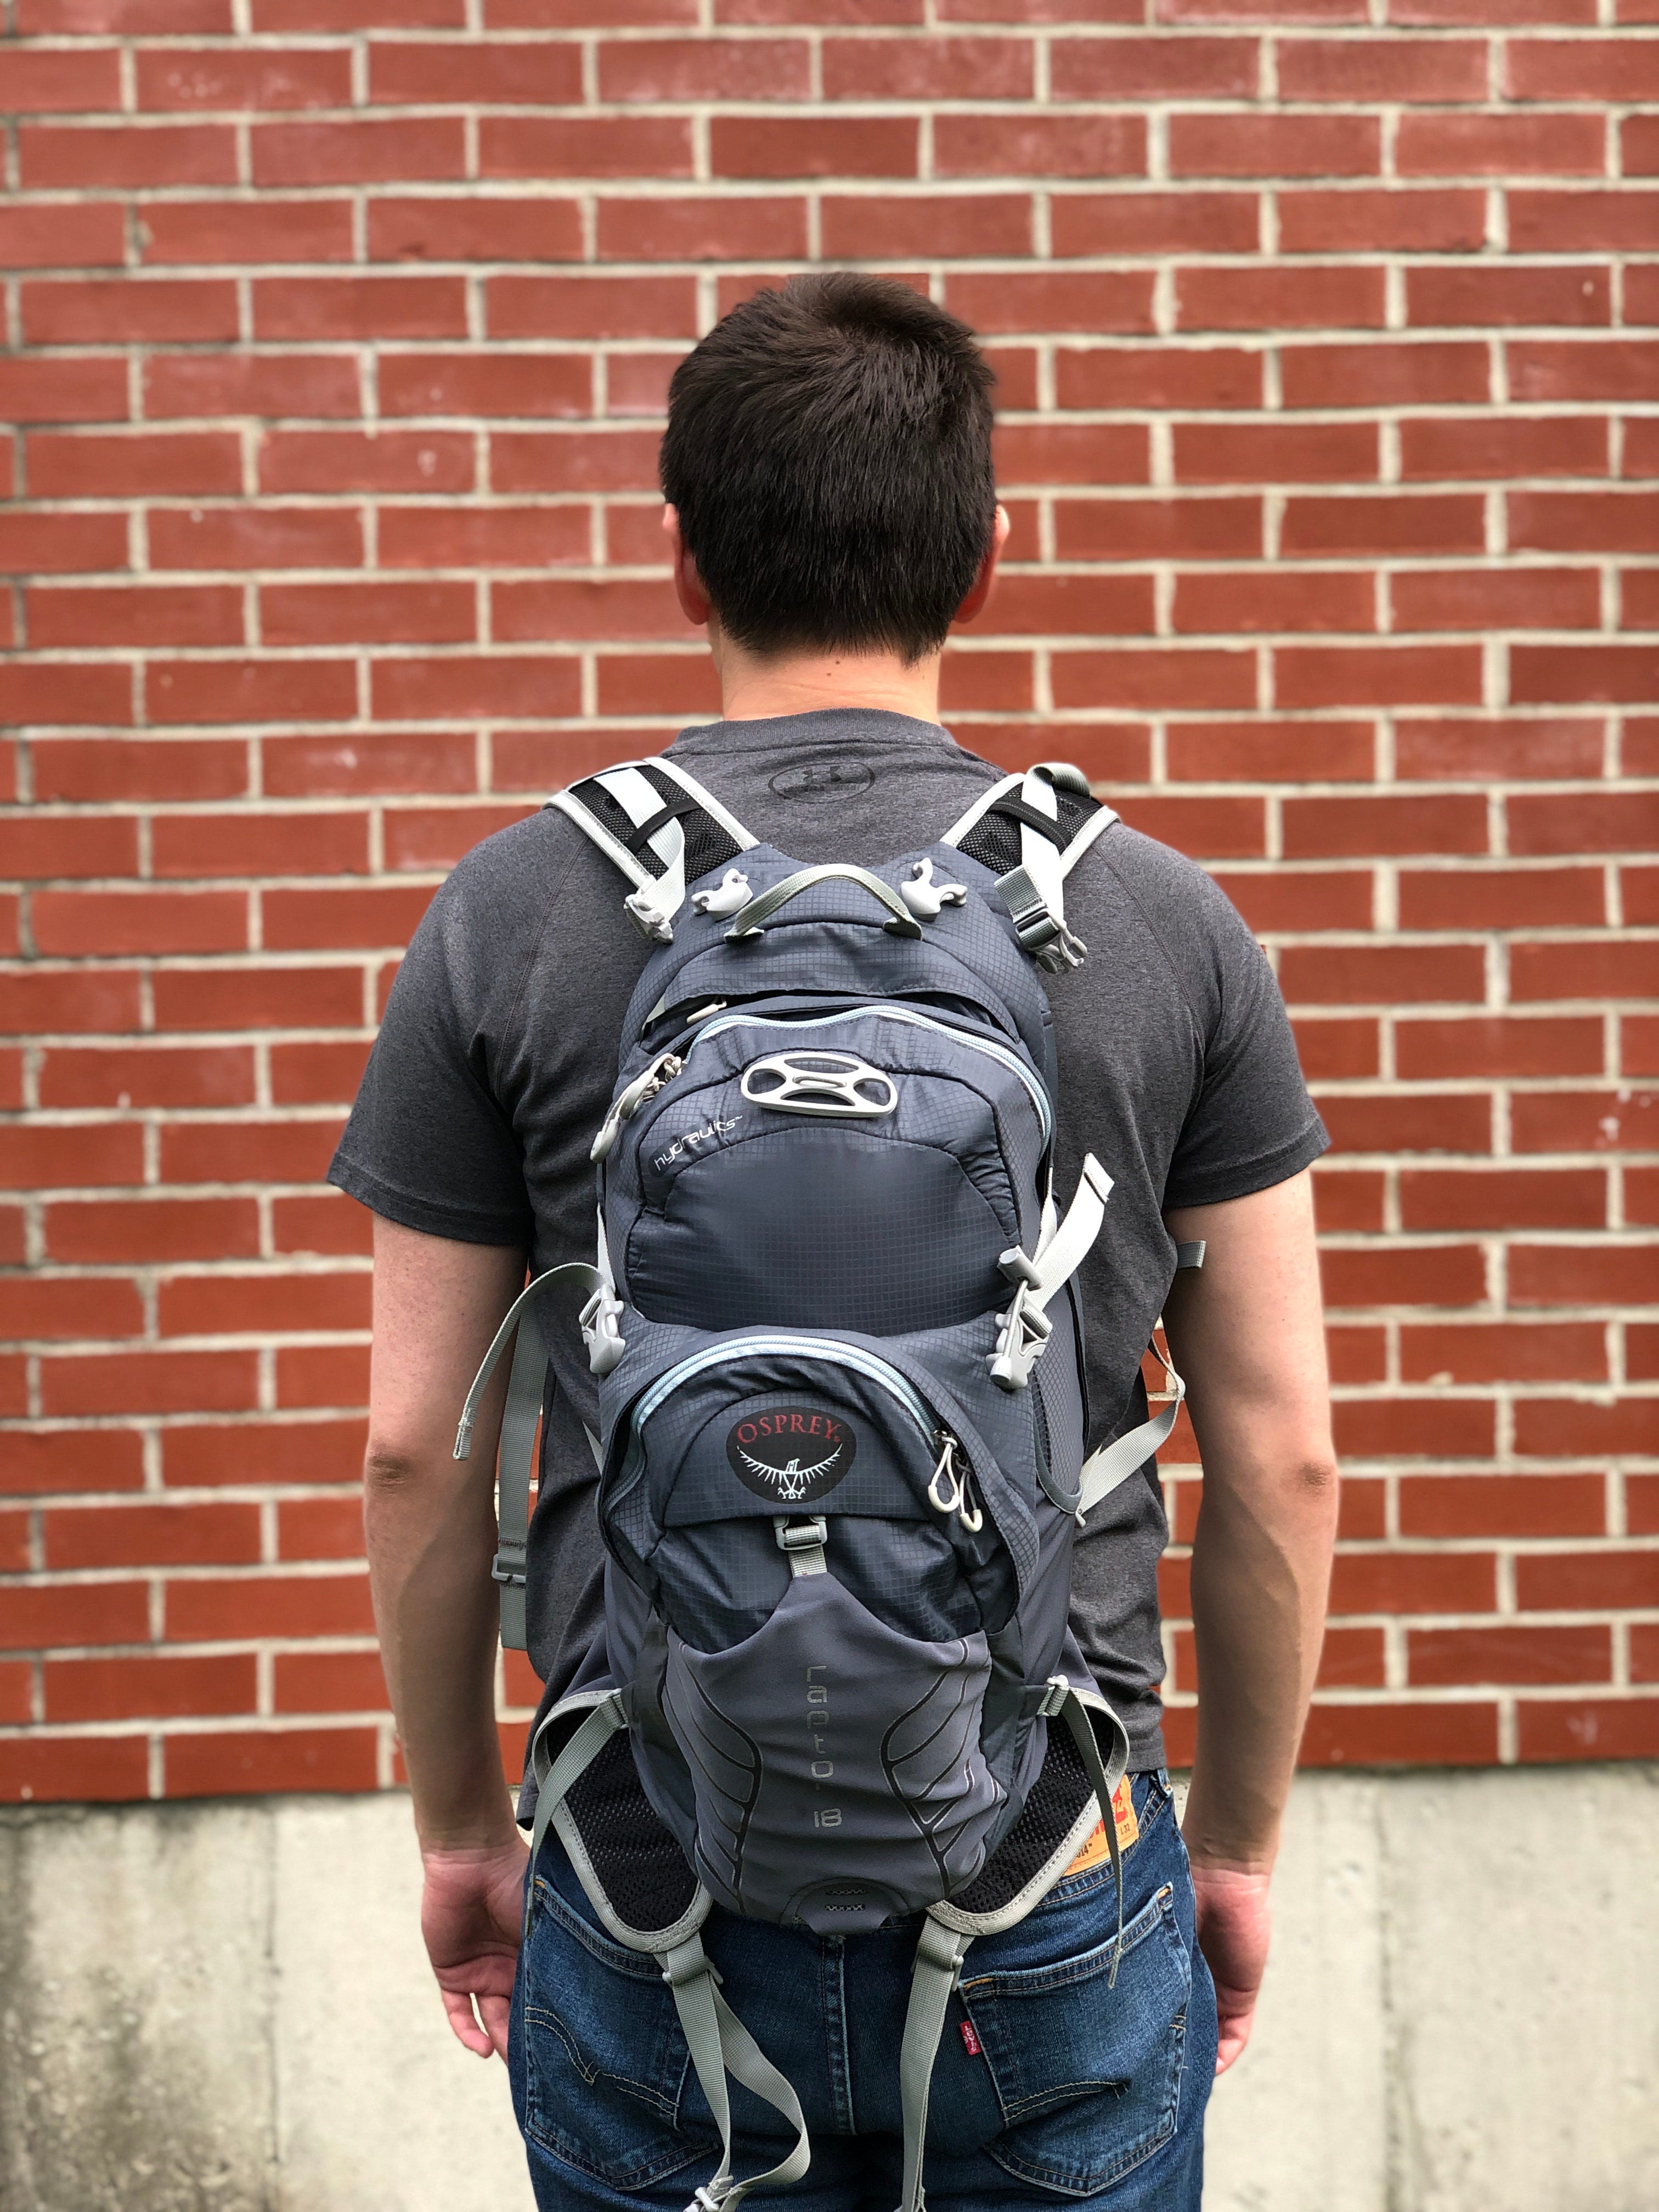 Micro-optimizing for a backpack. Everybody's got something they're nerdy… |  by Cameron Akker | Medium